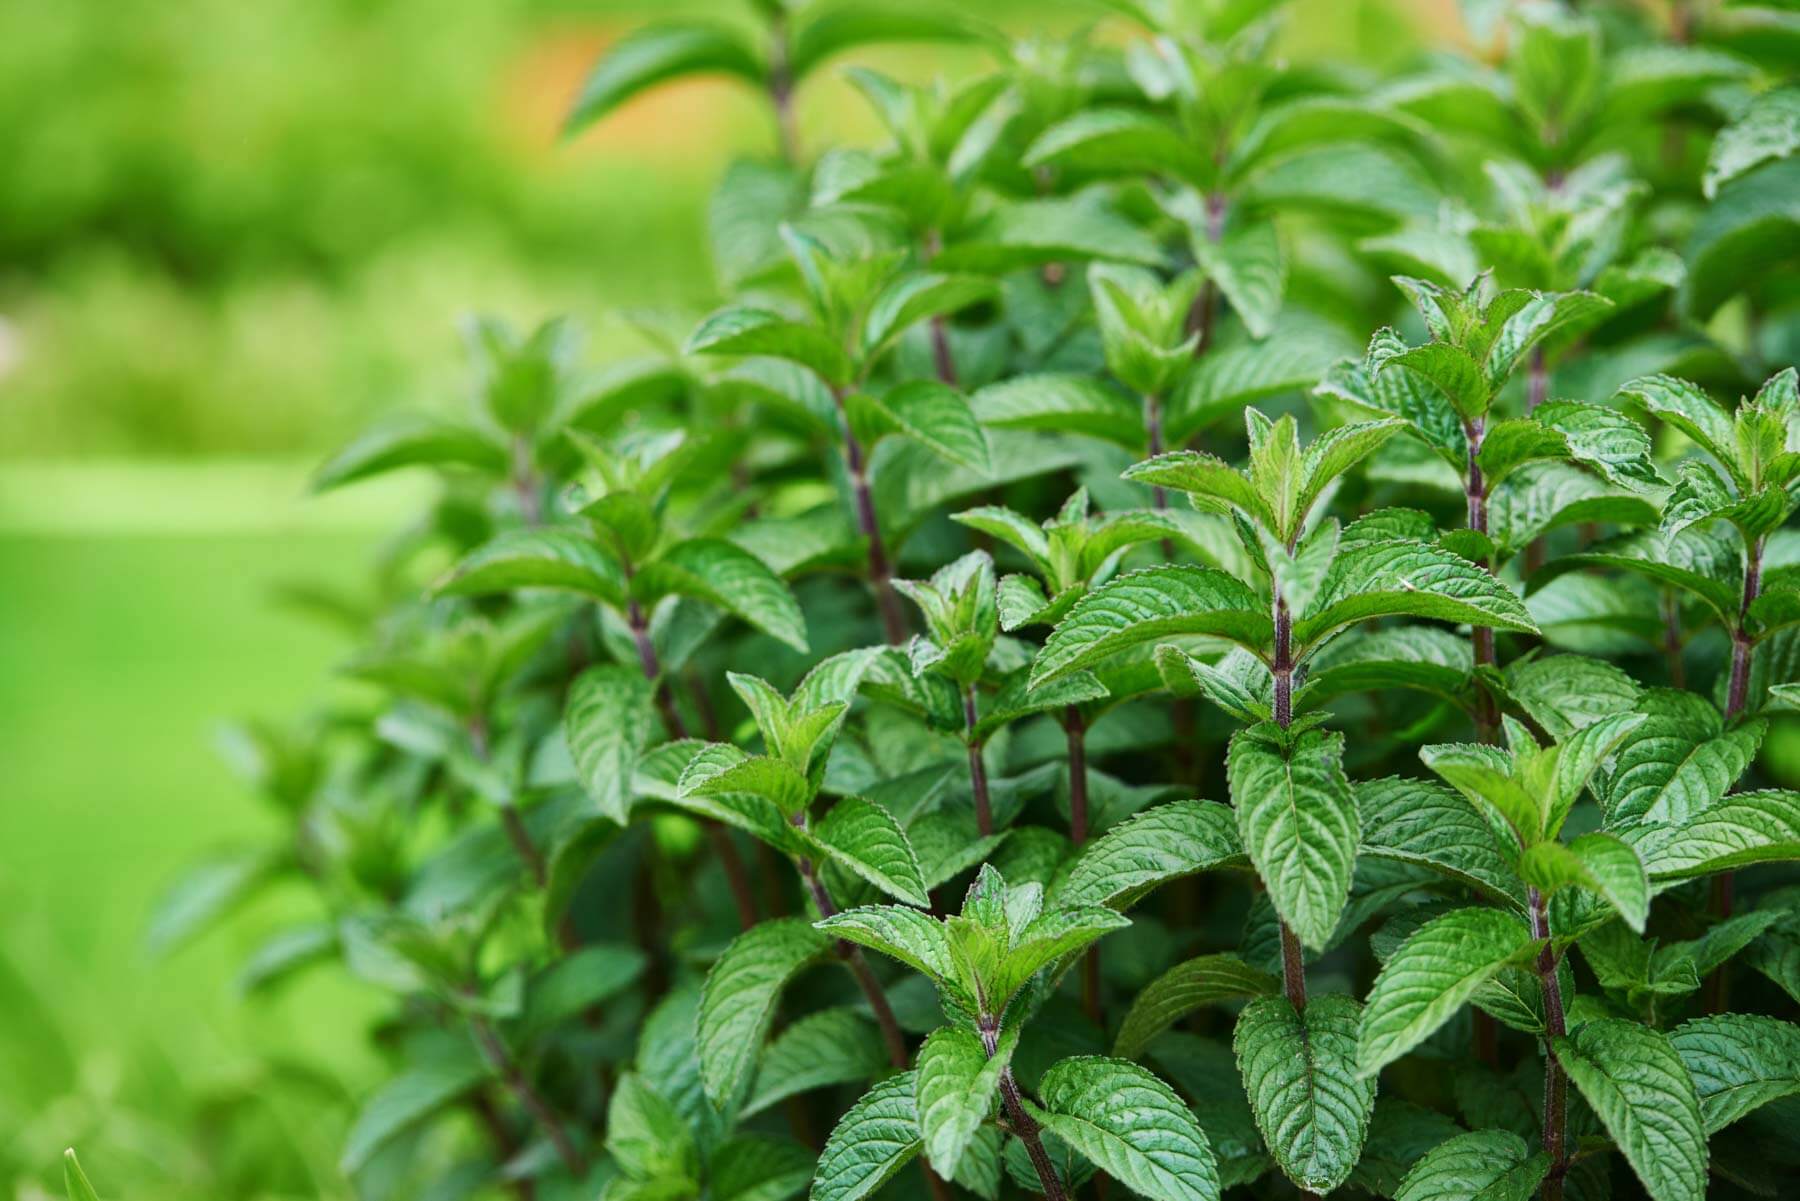 12 Health Benefits of Mint Leaves That You Should Know